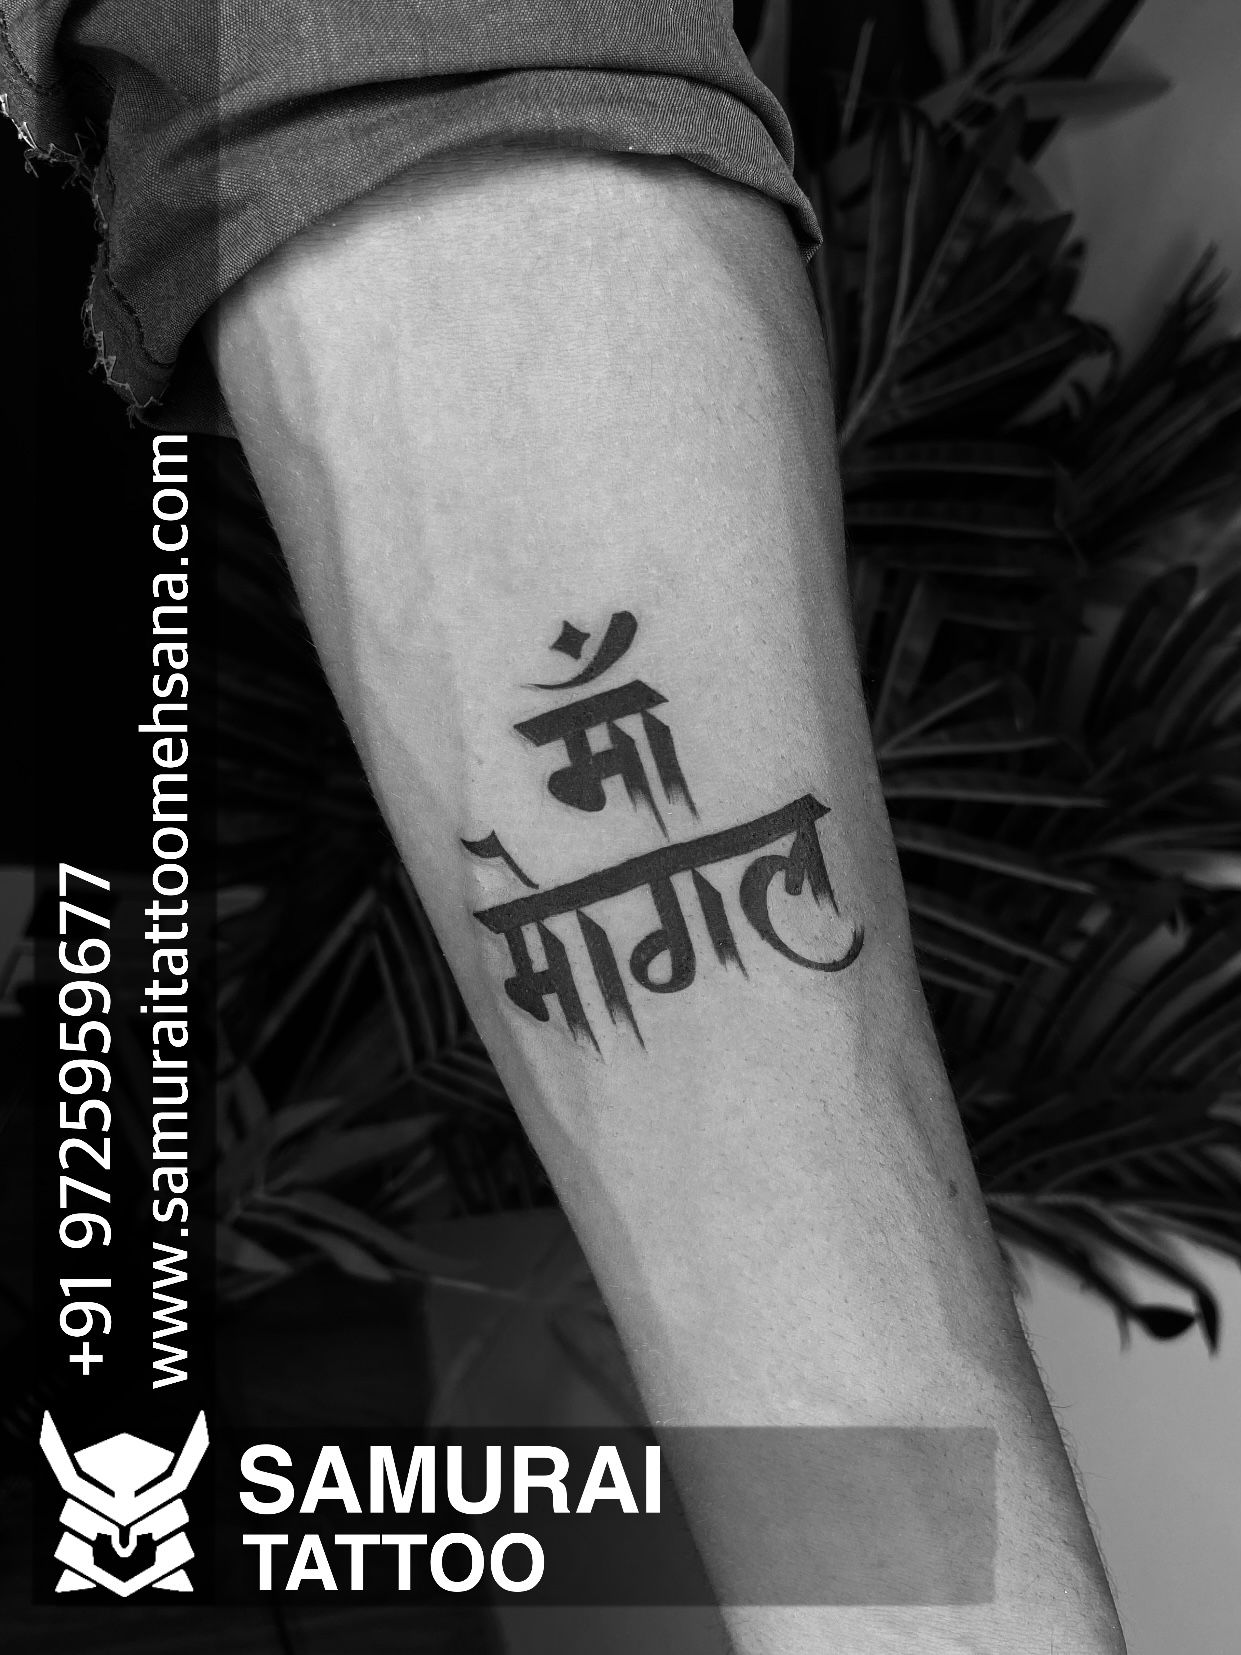 JACK TATTOO INK  Today tattoo working on hand simple MAA MOGAL tattoo name  done by me at studio morbi JACKTATTOOINK  Facebook